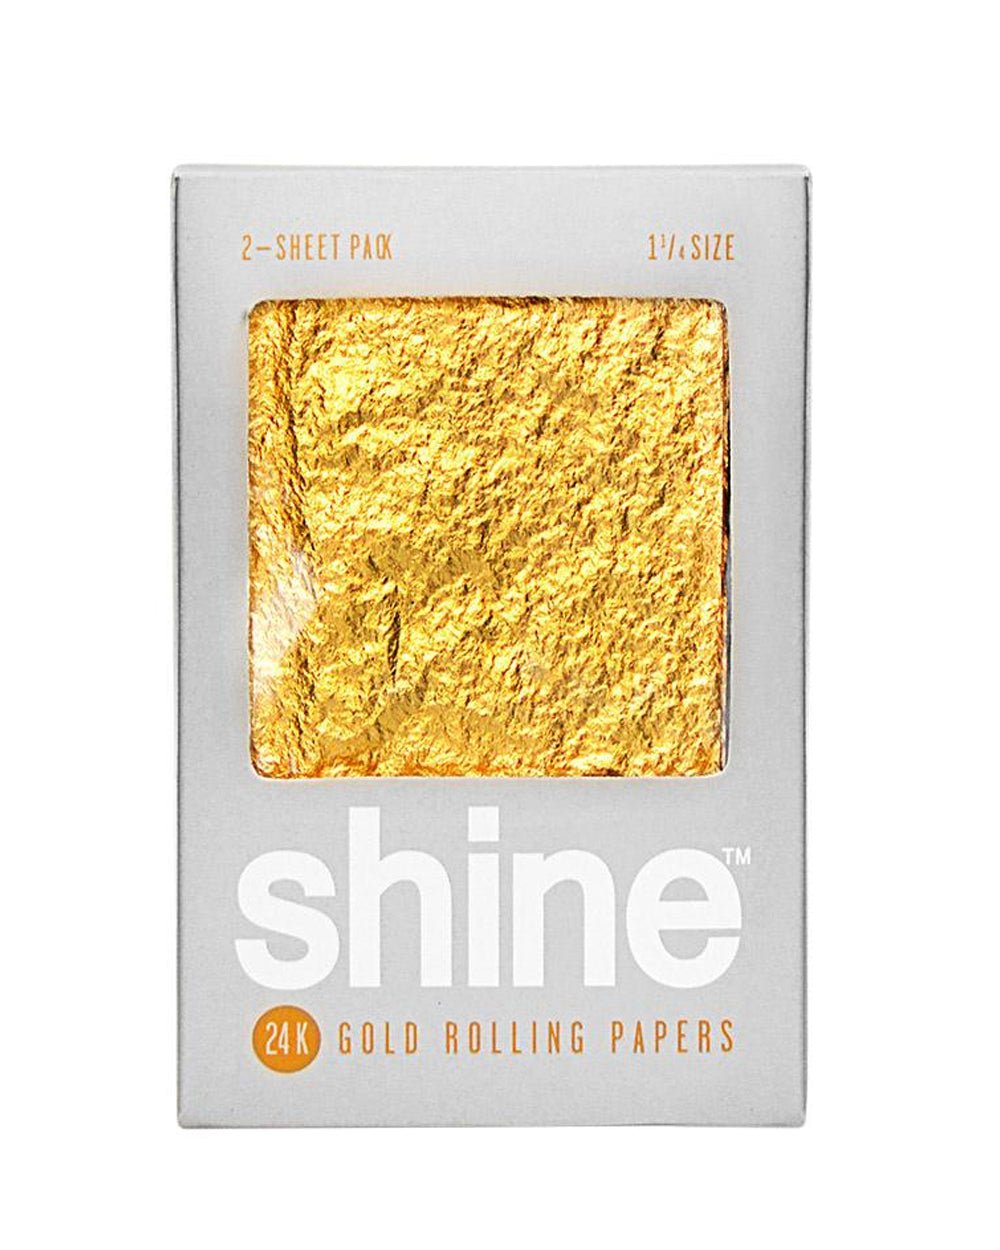 SHINE | 24K Gold 1 1/4 Size Rolling Papers | 83mm - Edible Gold - 2 Count - 1